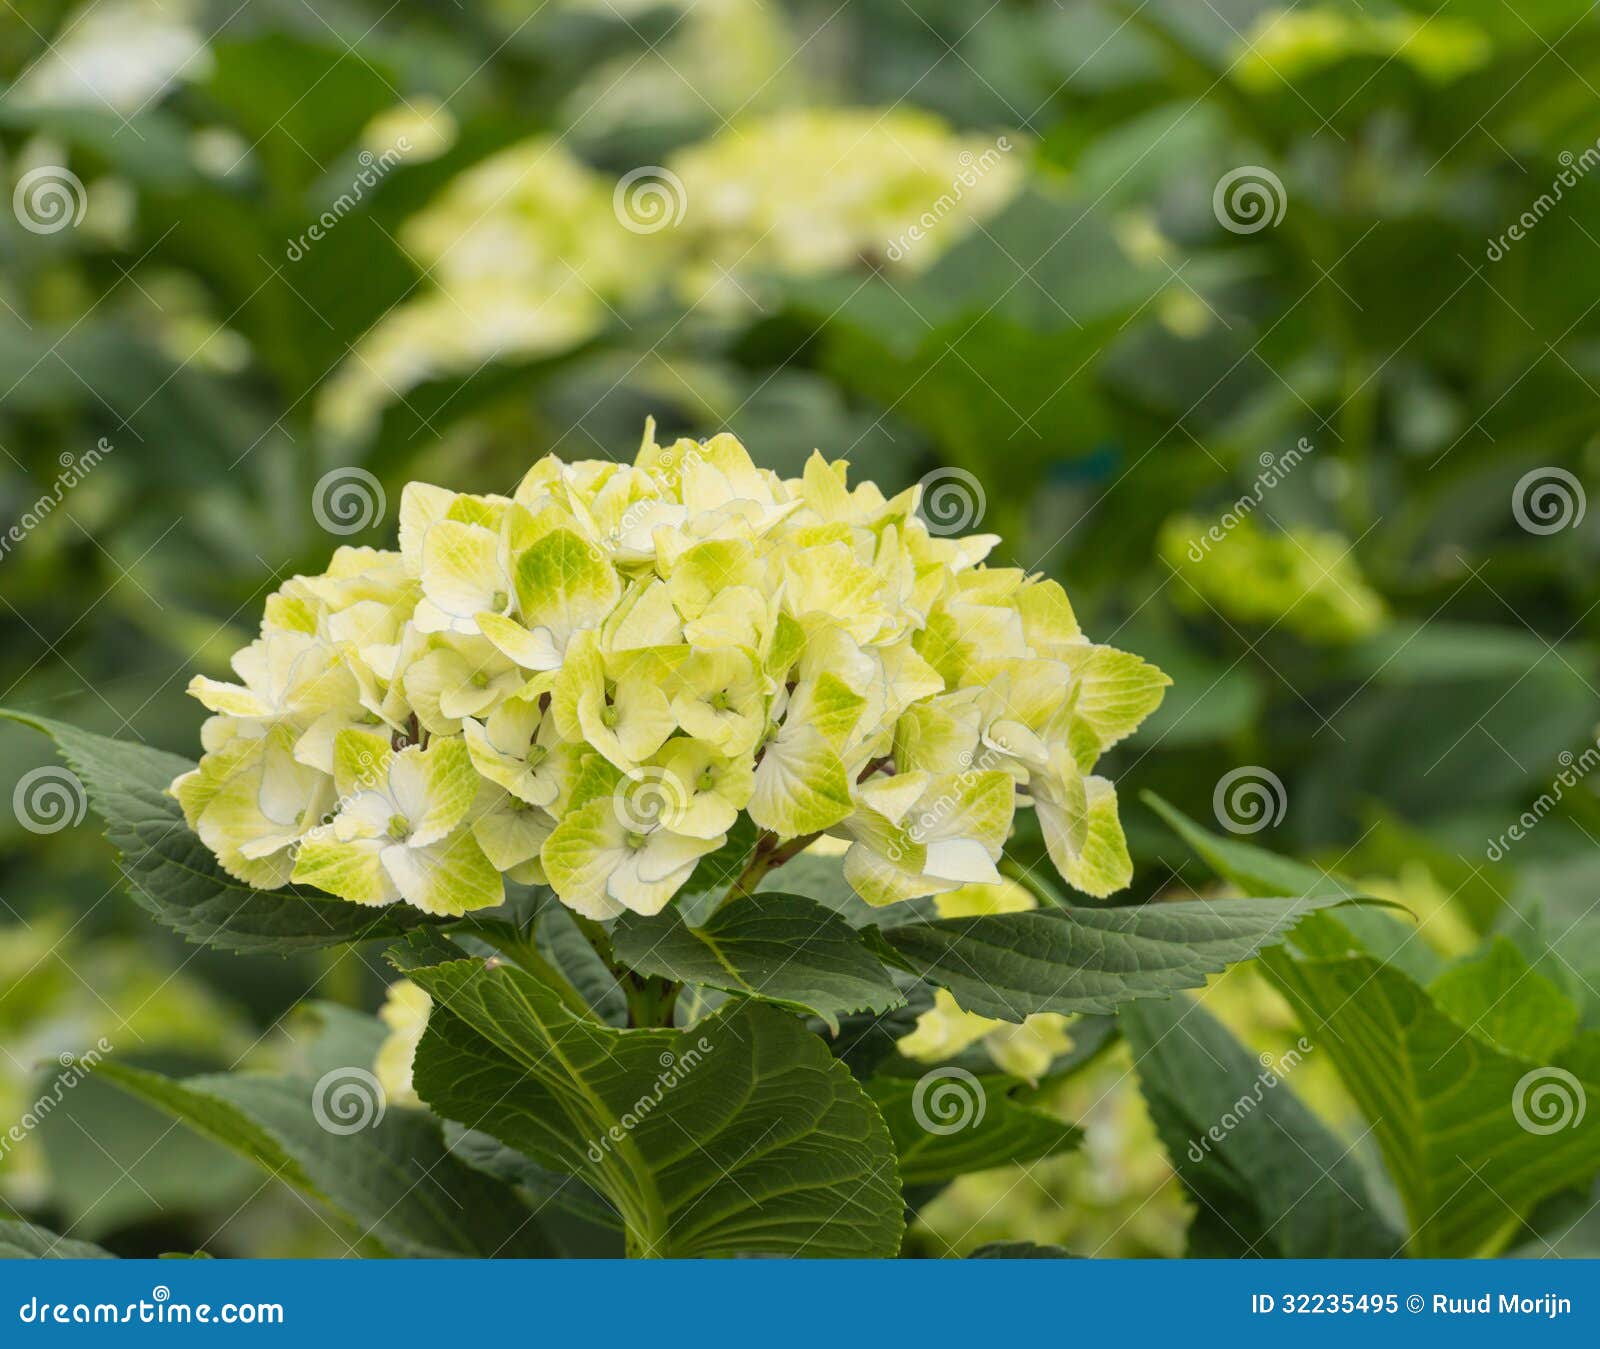 White and yellow umbels of Hydrangea plants in a Dutch horticulture 